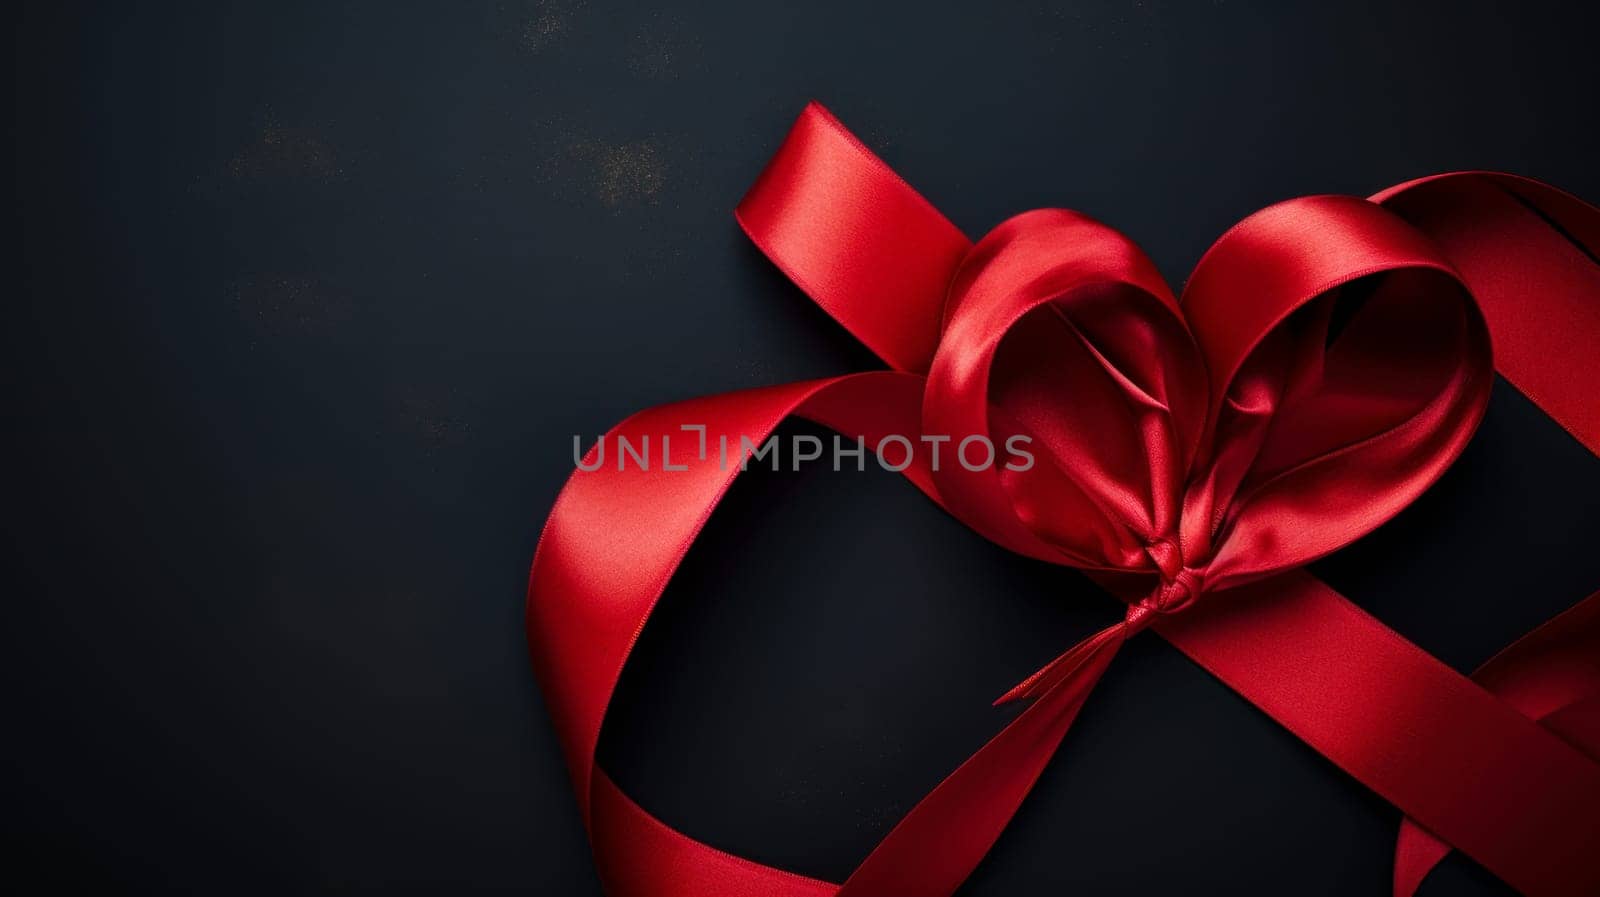 red ribbon in the shape of a heart on a dark background by Alla_Yurtayeva